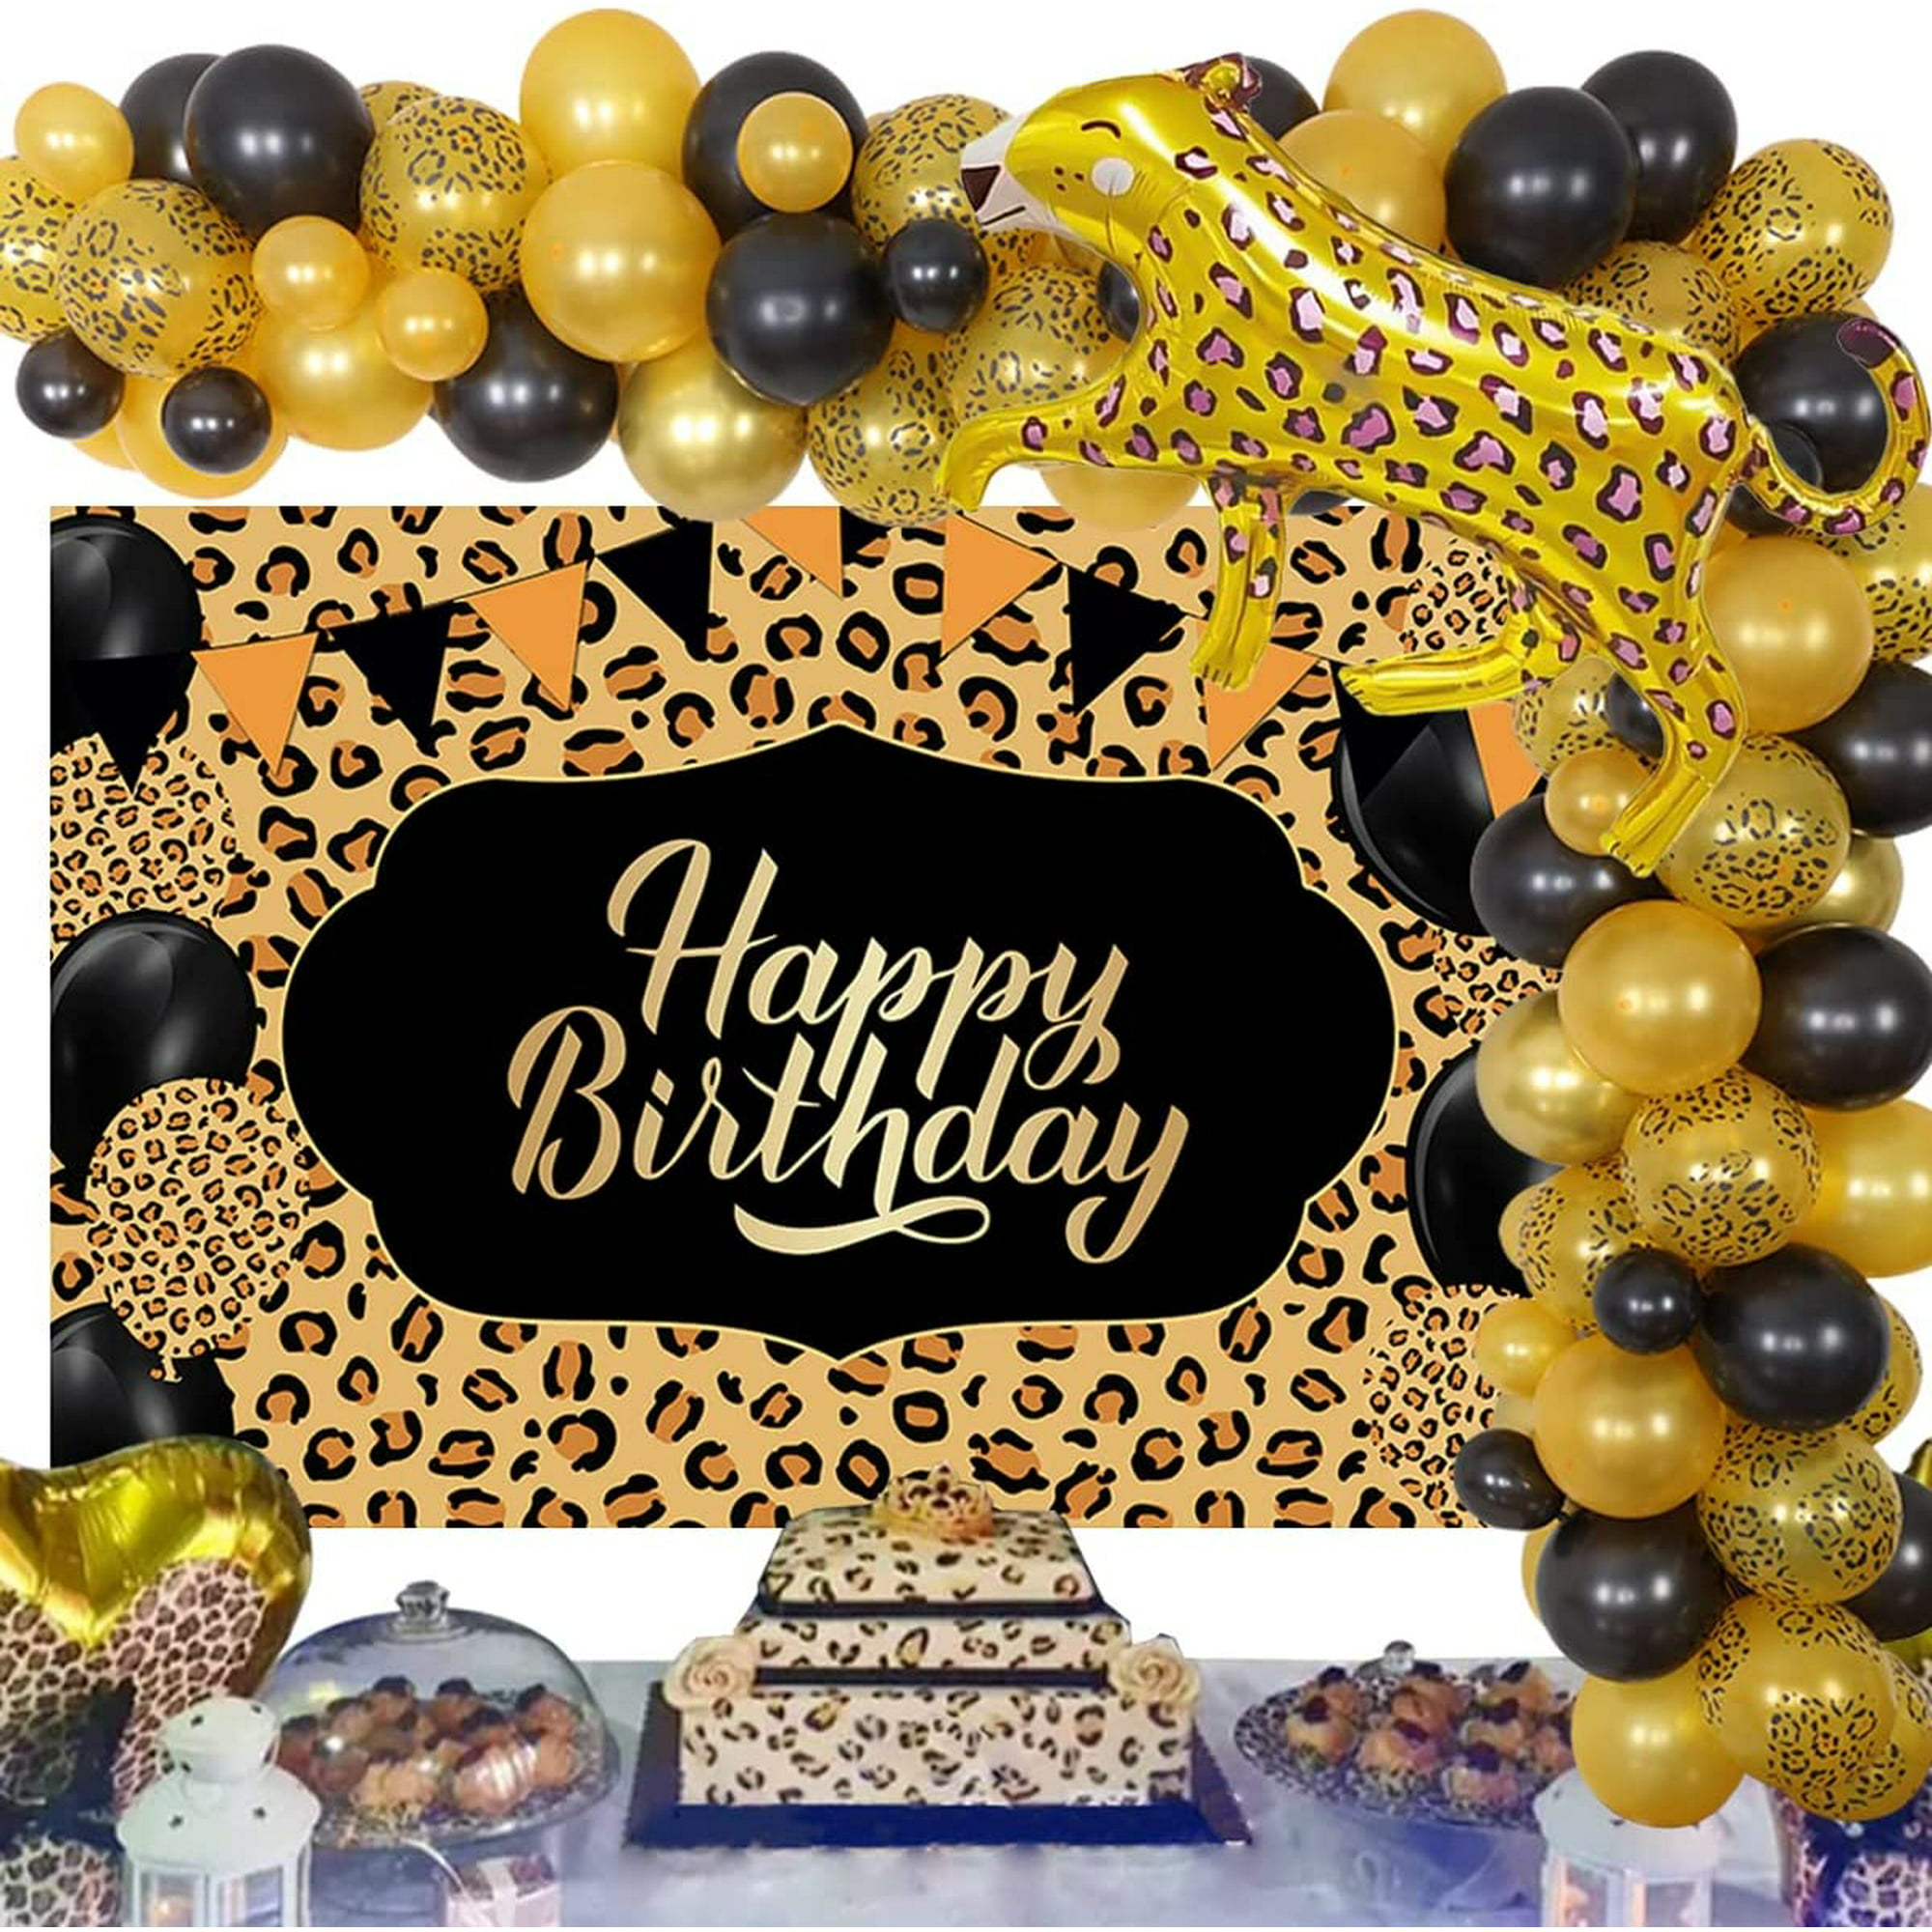 Cheetah Birthday Decorations Set - Leopard Party Decorations with ...